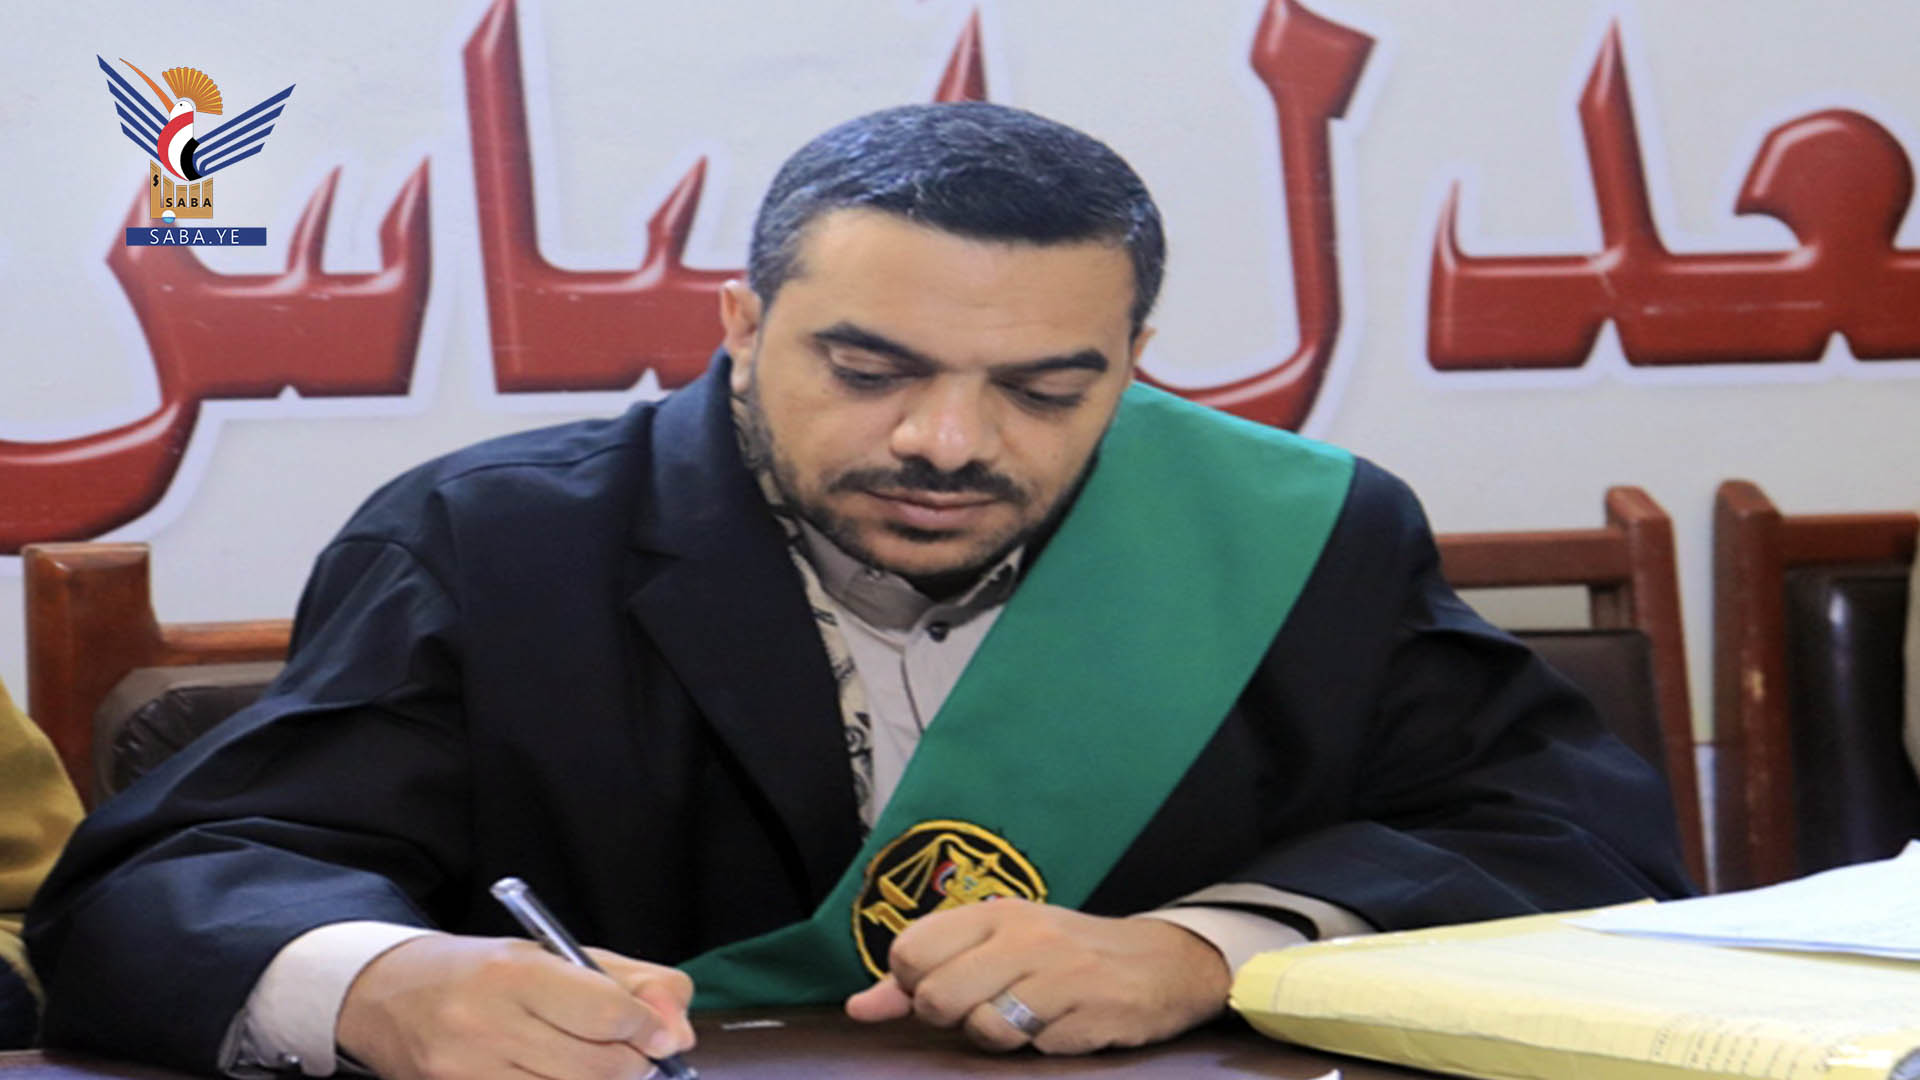 Sana'a City court adjourns ruling on estate forgery for 14 May